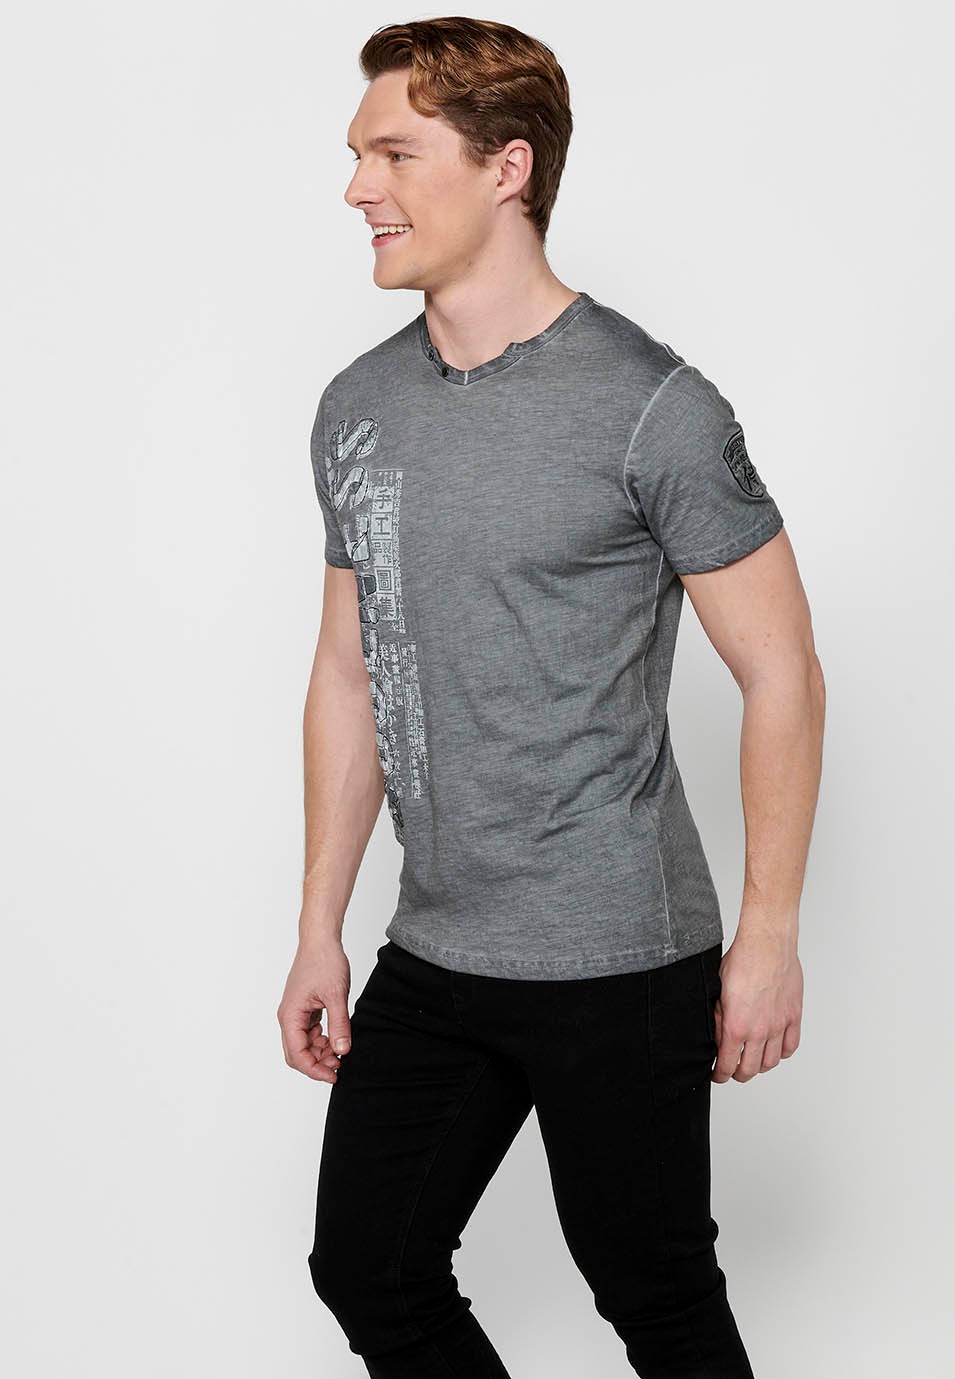 Short-sleeved cotton t-shirt, V-neck with button decoration, gray color for men